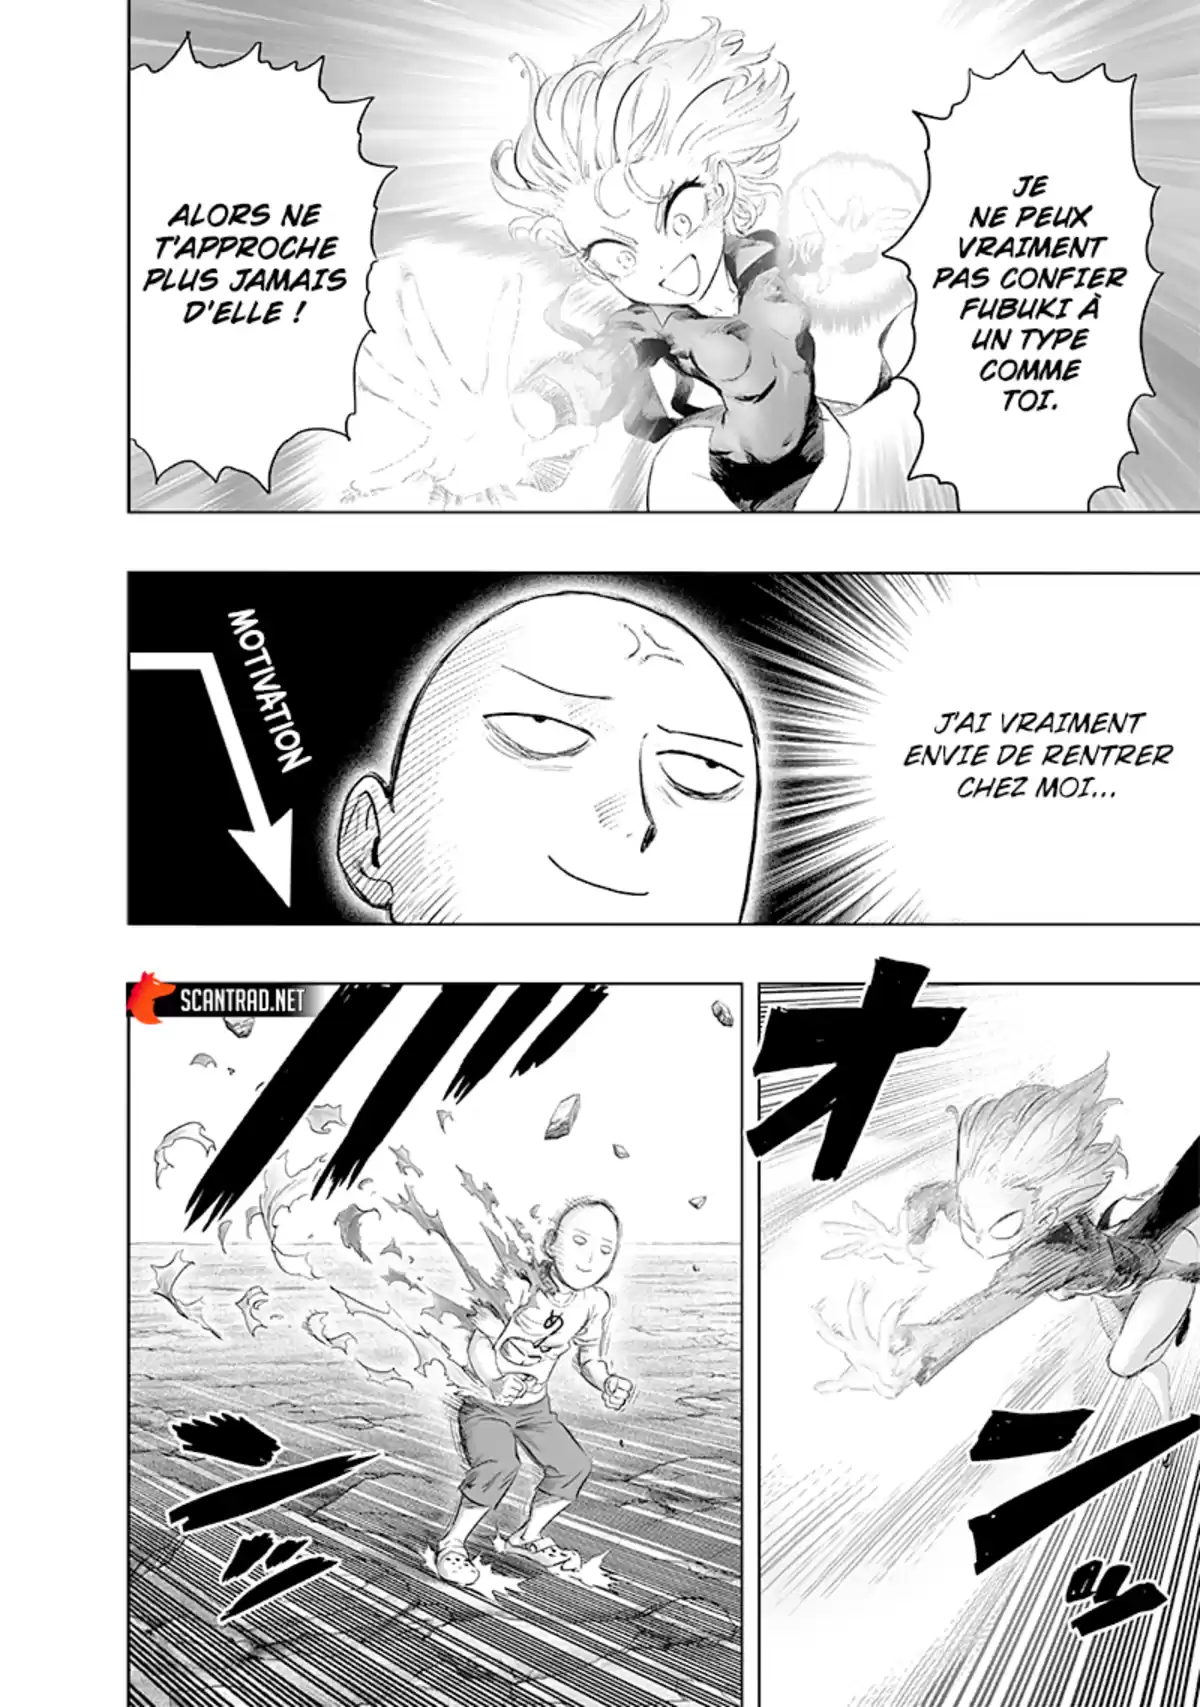 One-Punch Man Chapitre 180 page 2